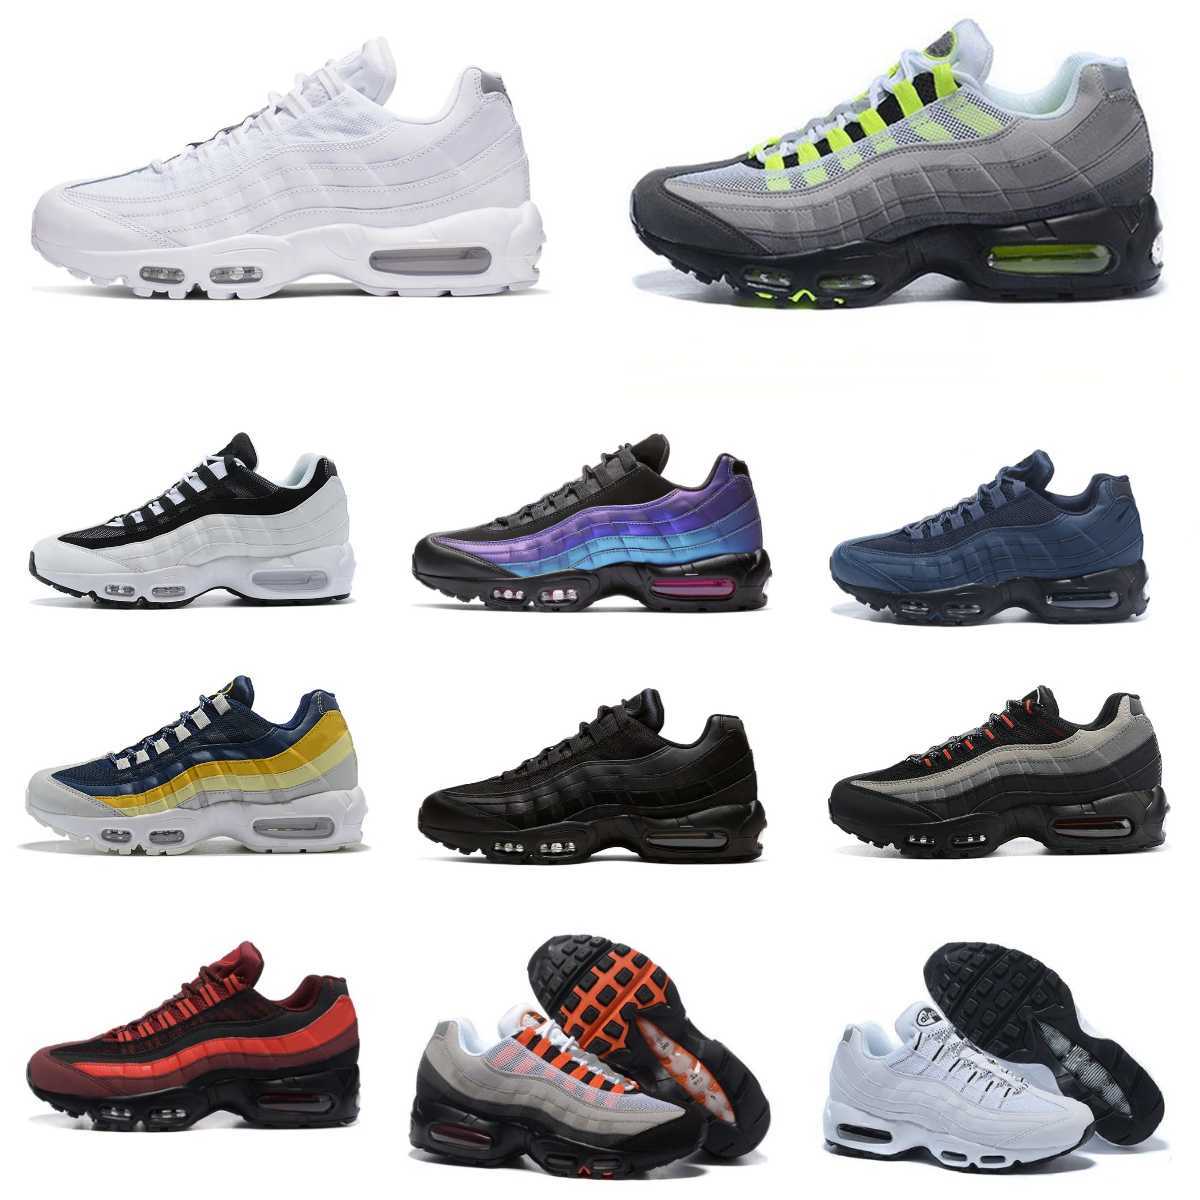 

Trainer 95 Mens Sports Shoes Yin Yang OG Airs Solar Triple Black White Blue Worldwide Seahawks Particle Grey Neon Laser Fuchsia Red Greedy 3.0 Designers Sneakers, Please contact us